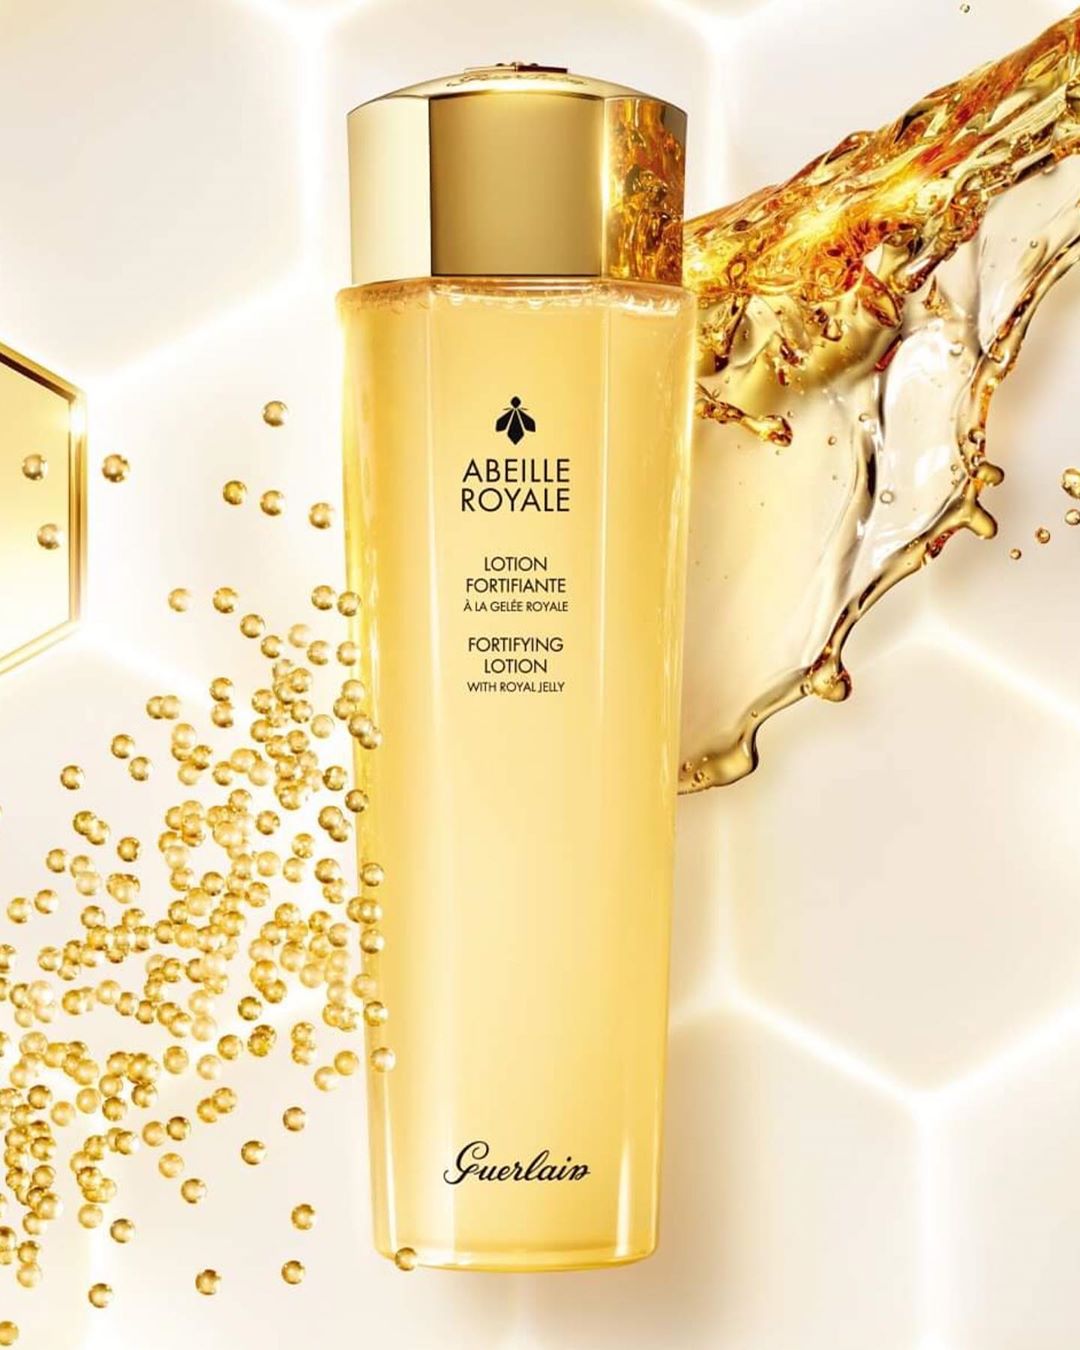 Guerlain - Begin your three-step Youth Repair Ritual with new Abeille Royale Fortifying Lotion, enriched with 25x more royal jelly.

Designed to be the first product in the Abeille Royale Youth Repair...